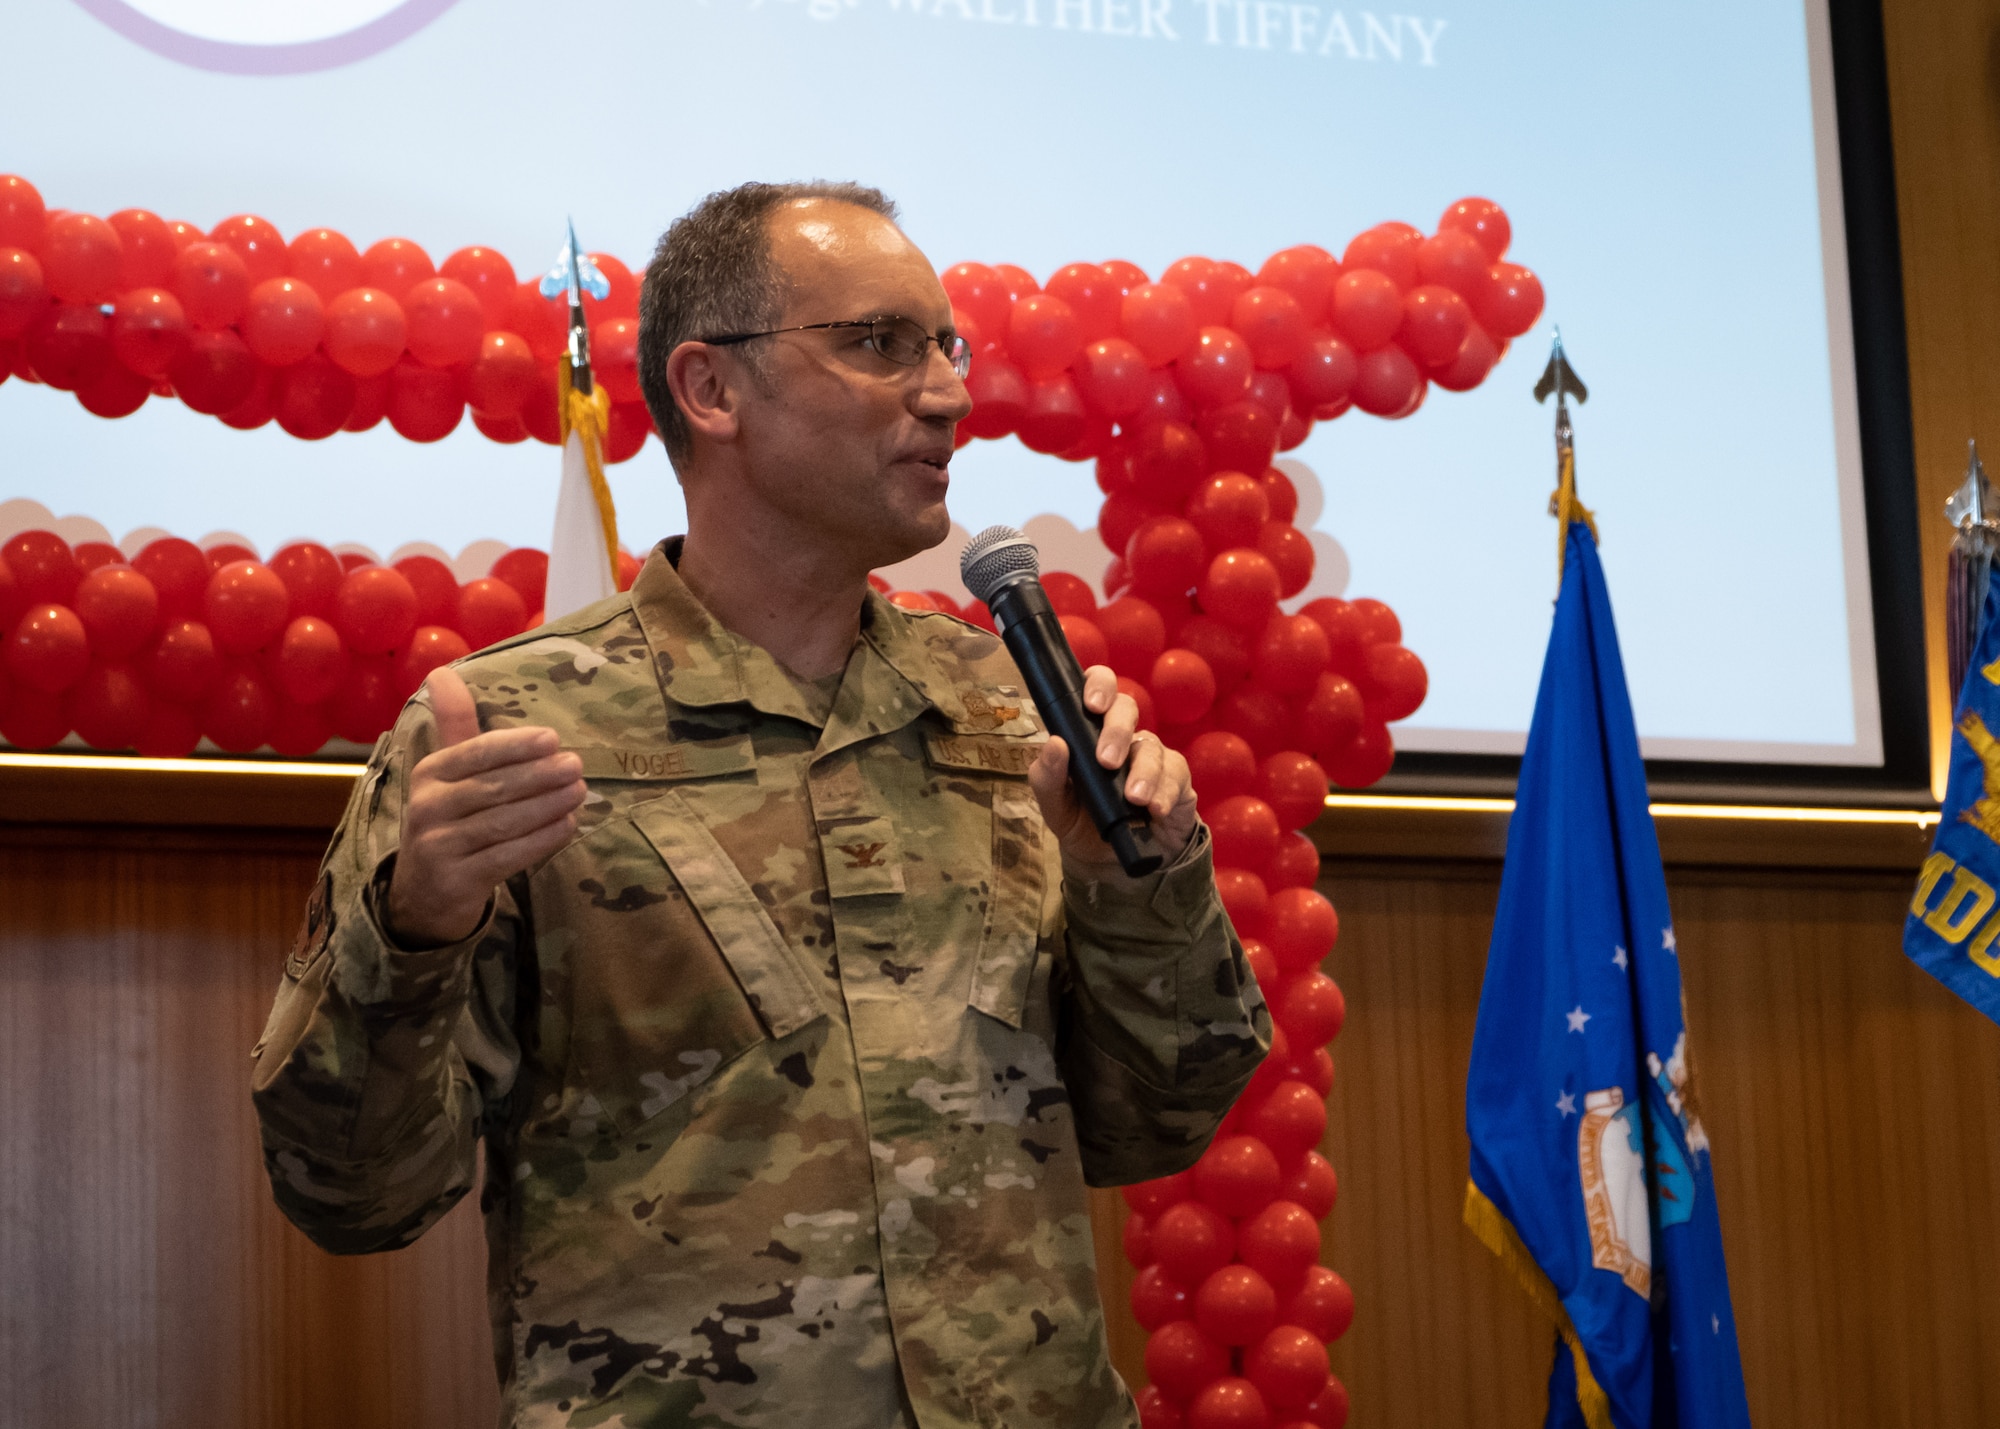 Col. George Vogel, 18th Wing Vice Commander, addresses the crowd as the Kadena Shoguns celebrate their newest staff sergeant selects during a celebration at Kadena Air Base, Japan, Aug. 23, 2019.